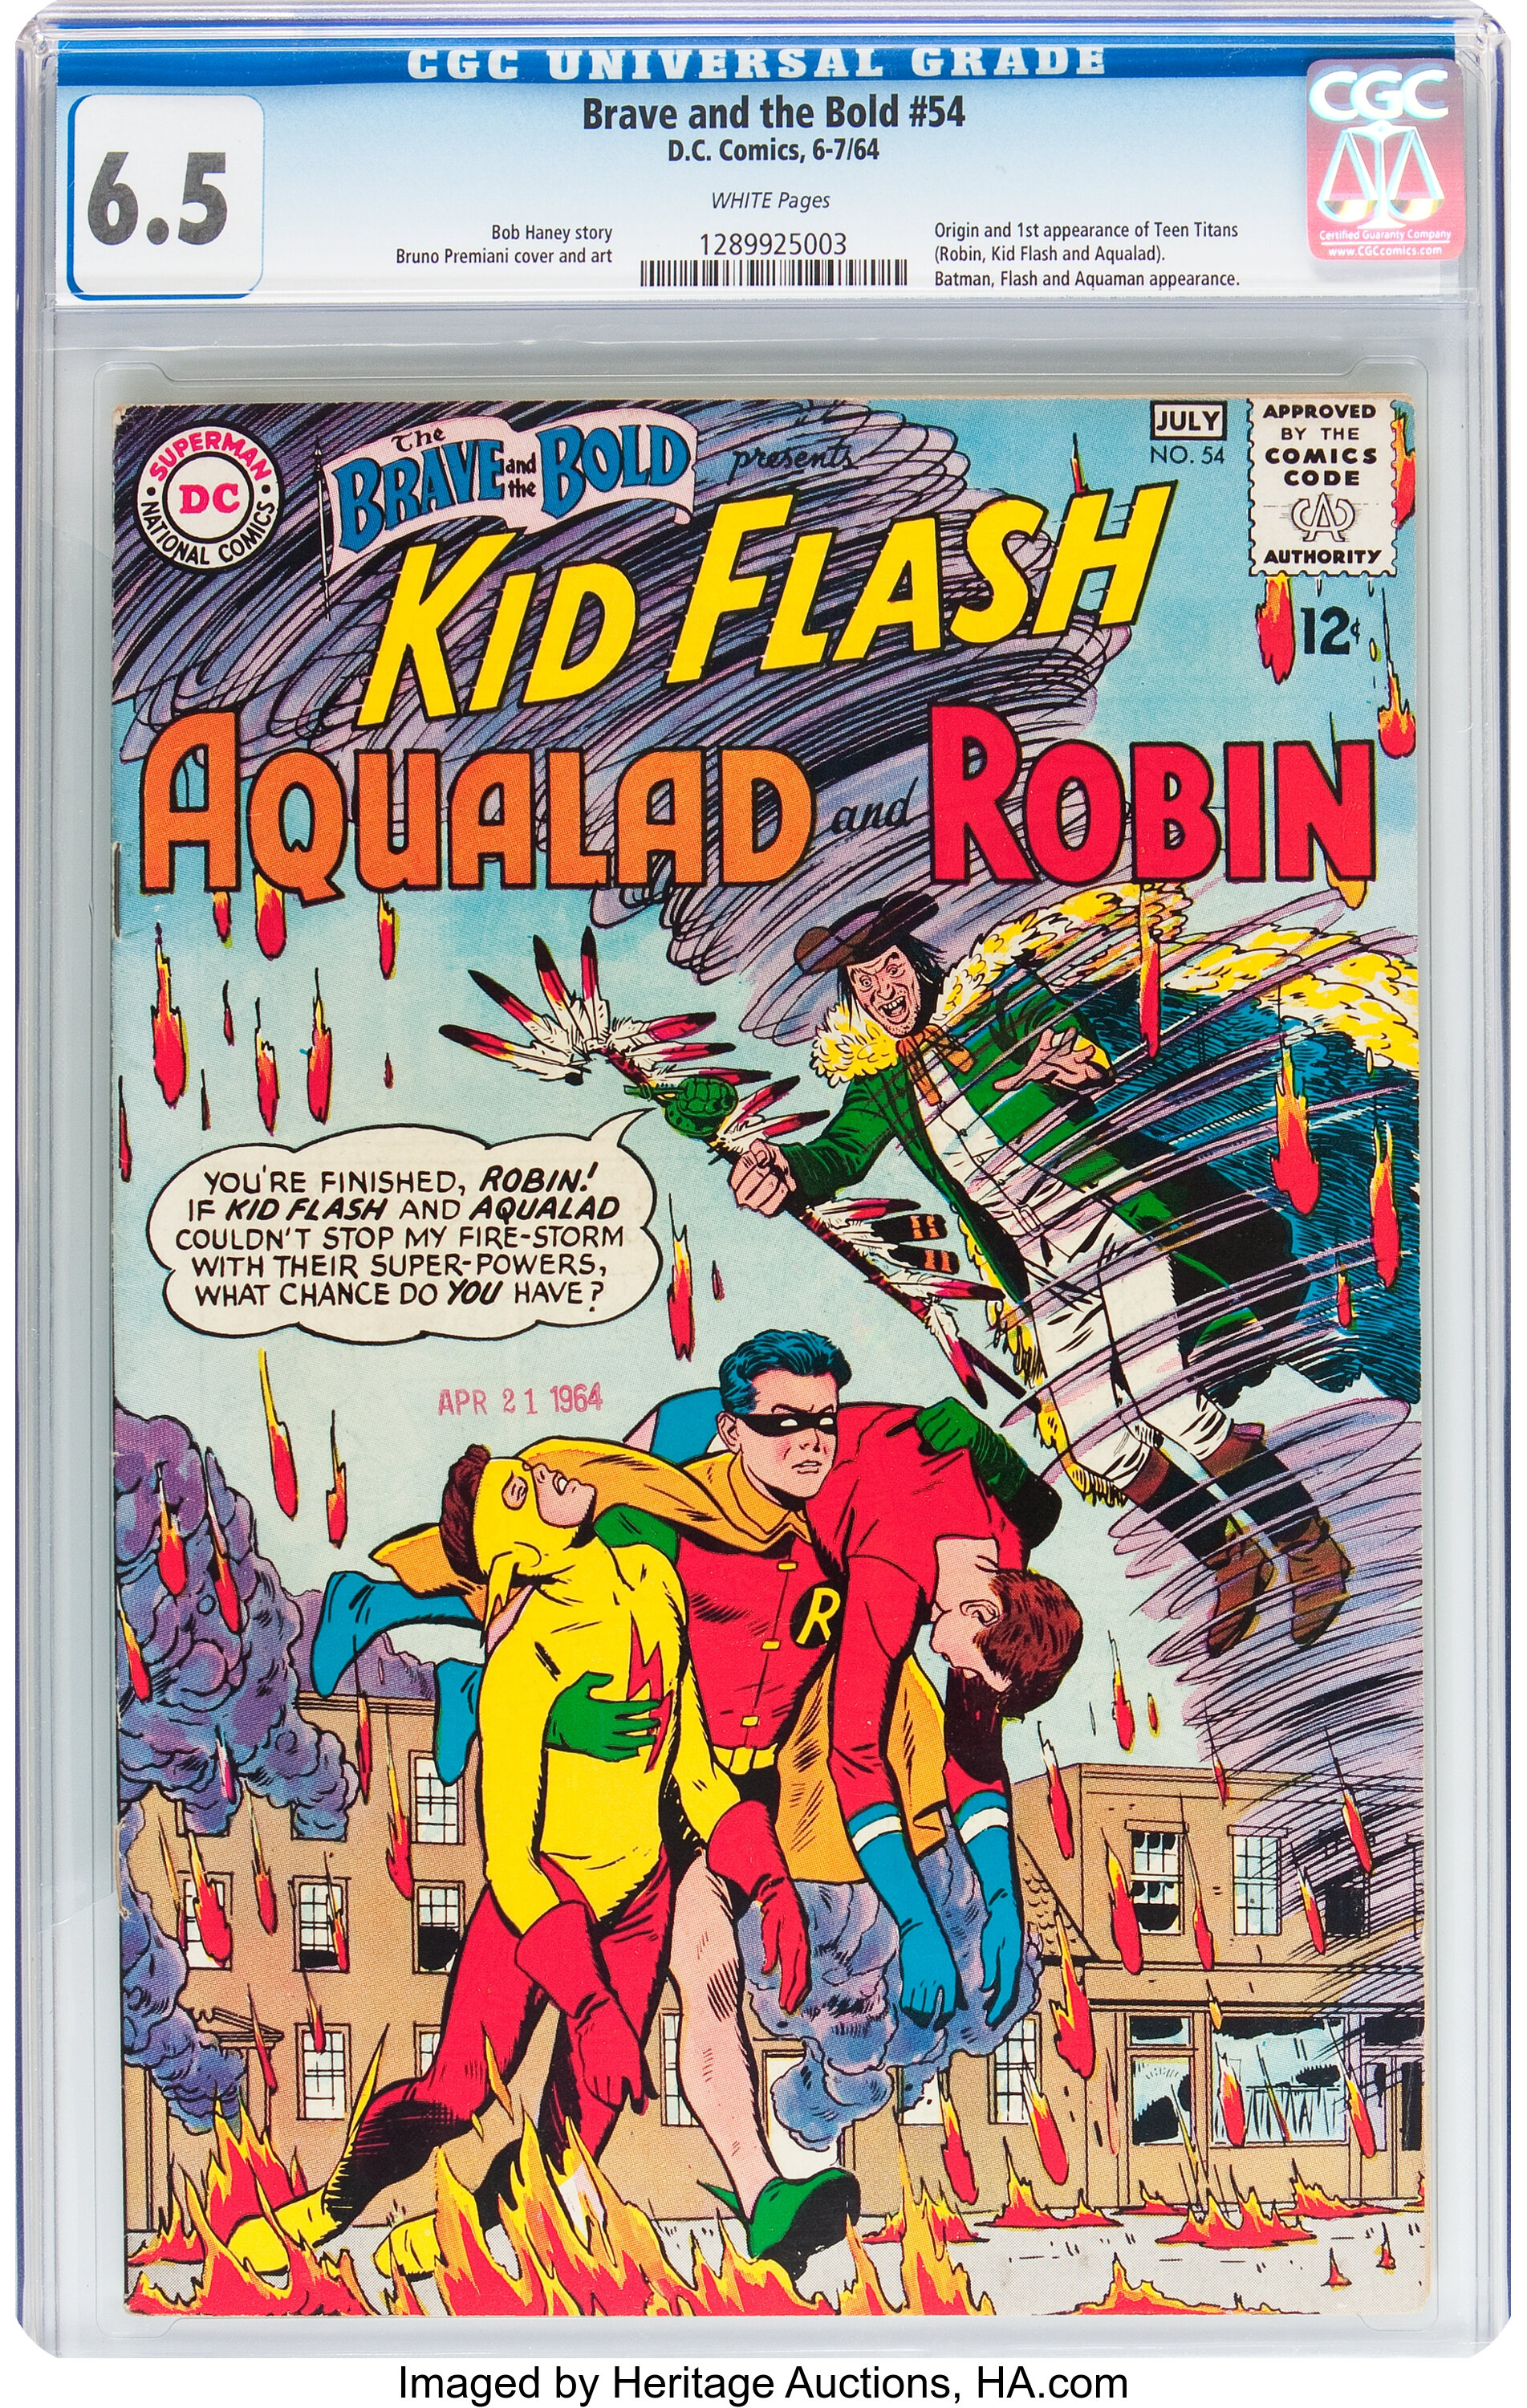 The Brave and the Bold #54 Kid Flash, Aqualad, and Robin (DC, 1964), Lot  #14151